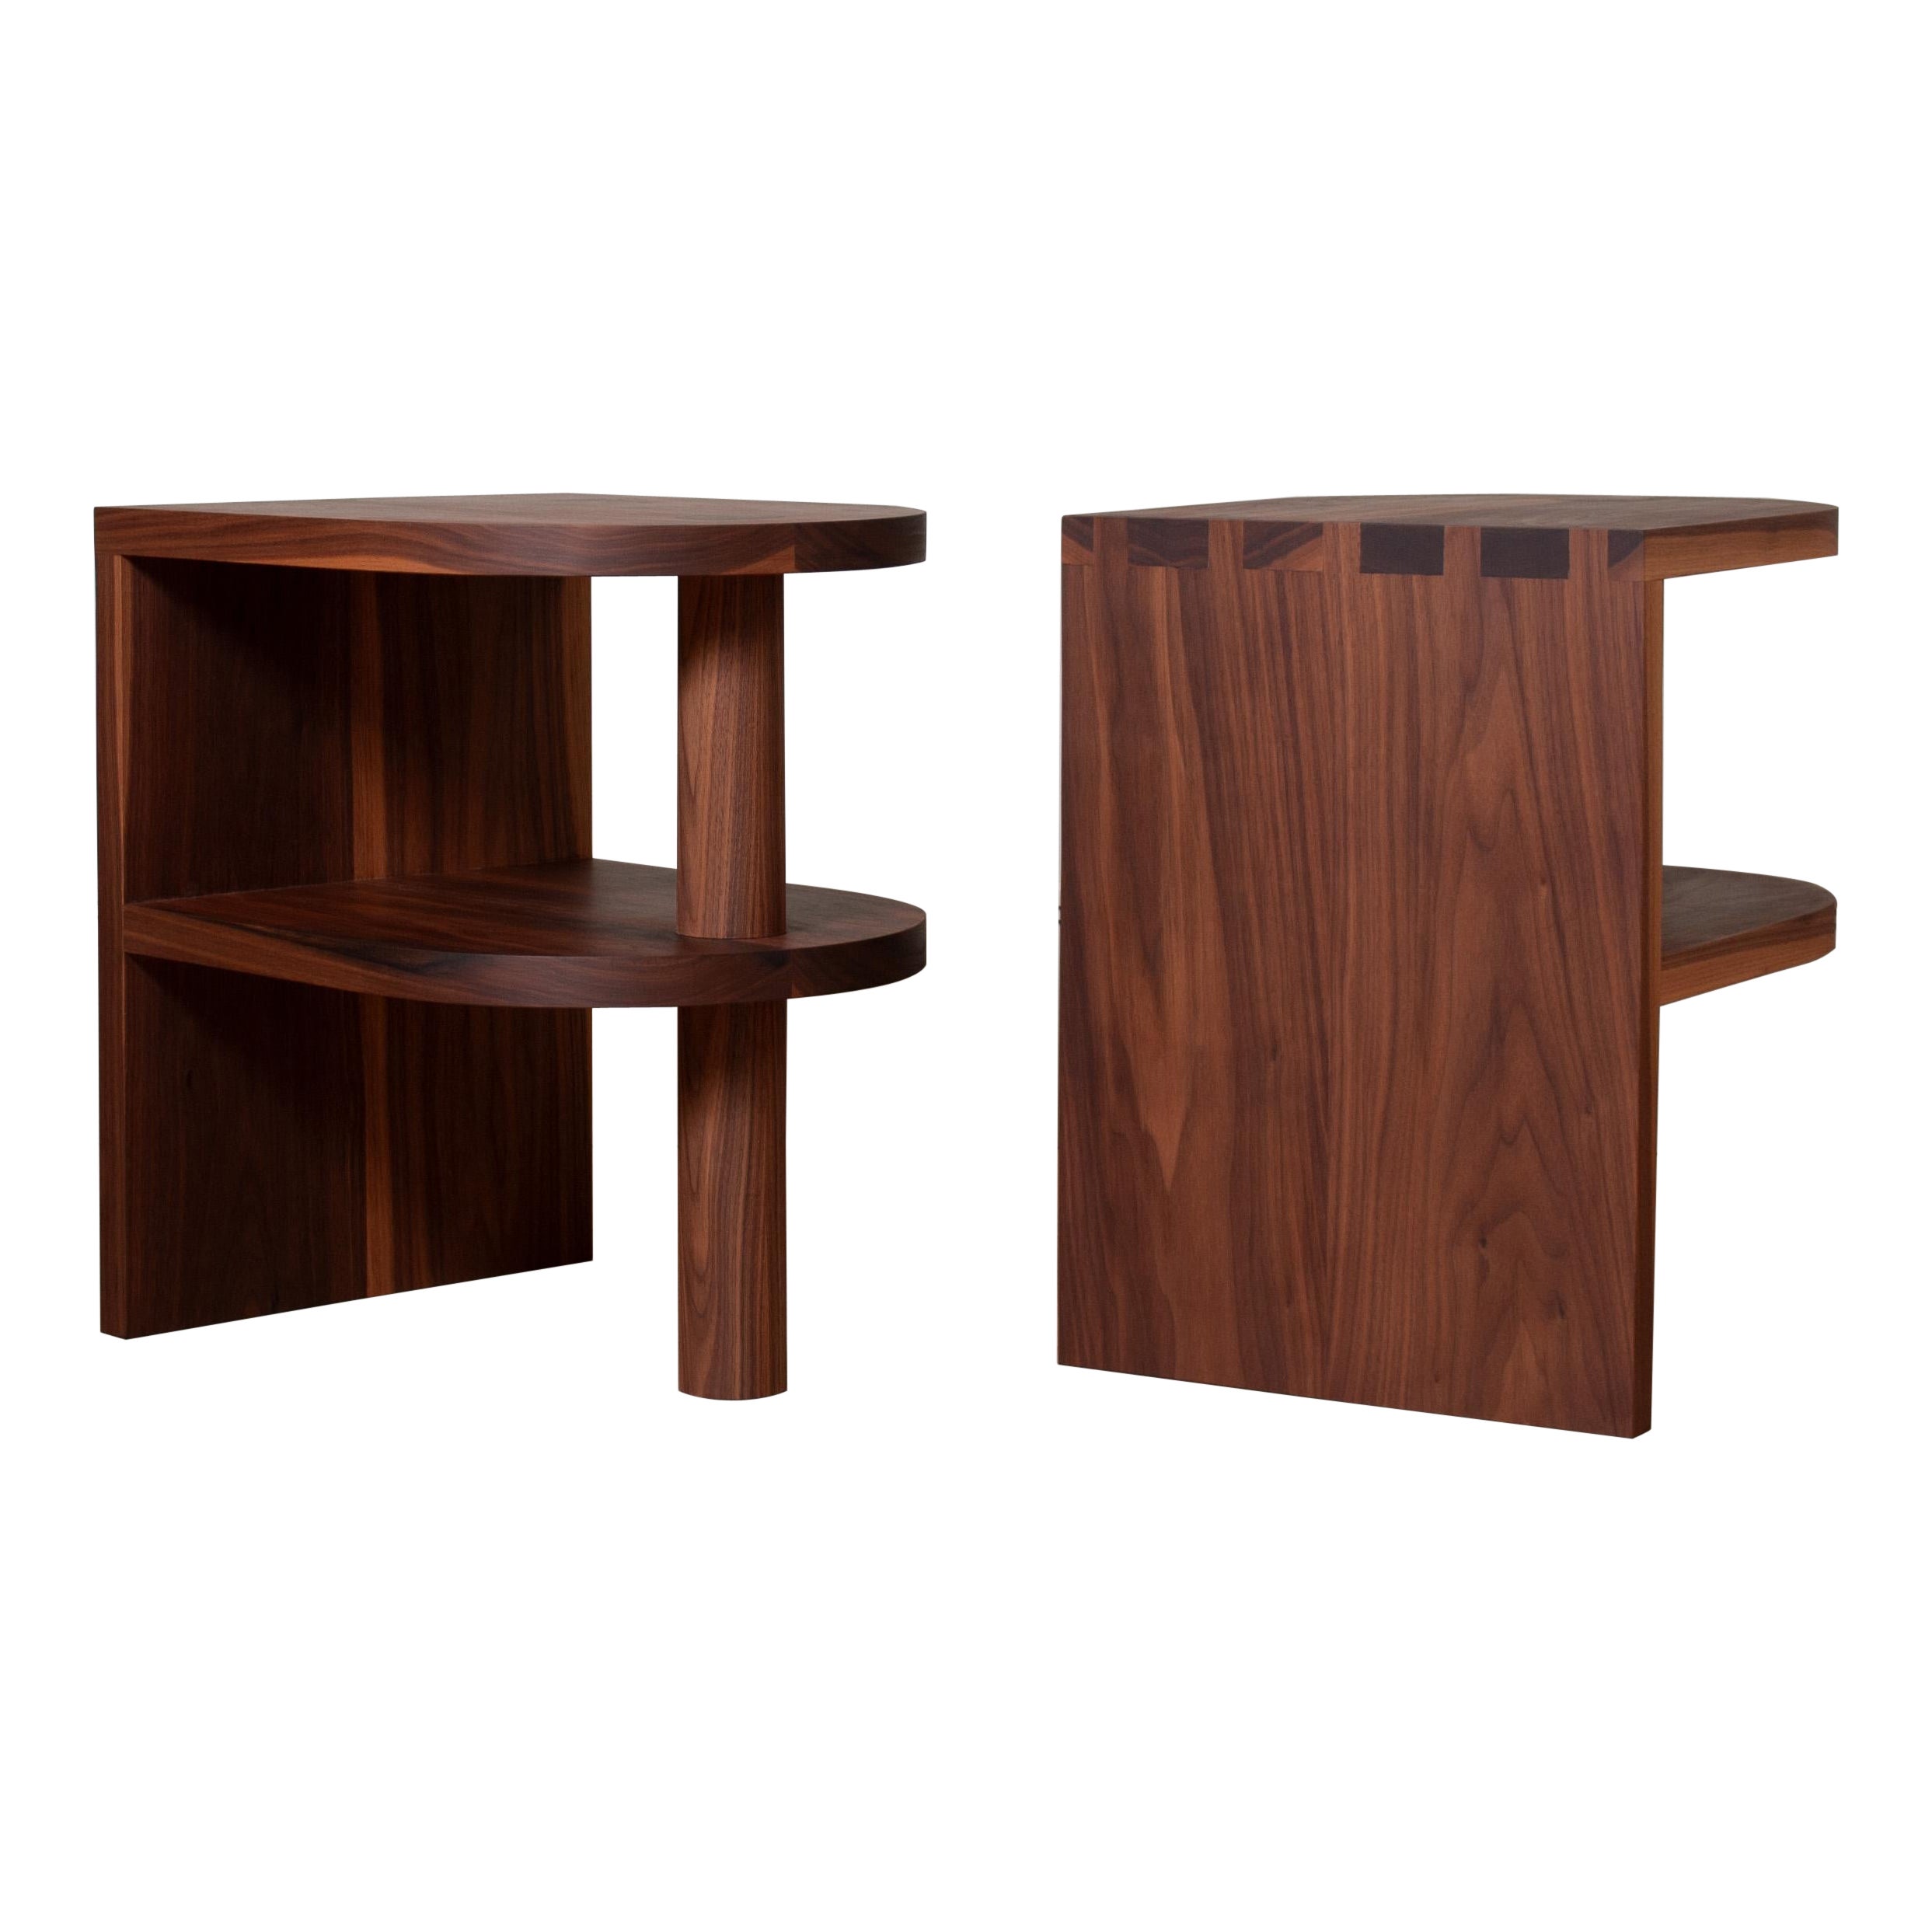 Pair of Handcrafted Walnut End Tables